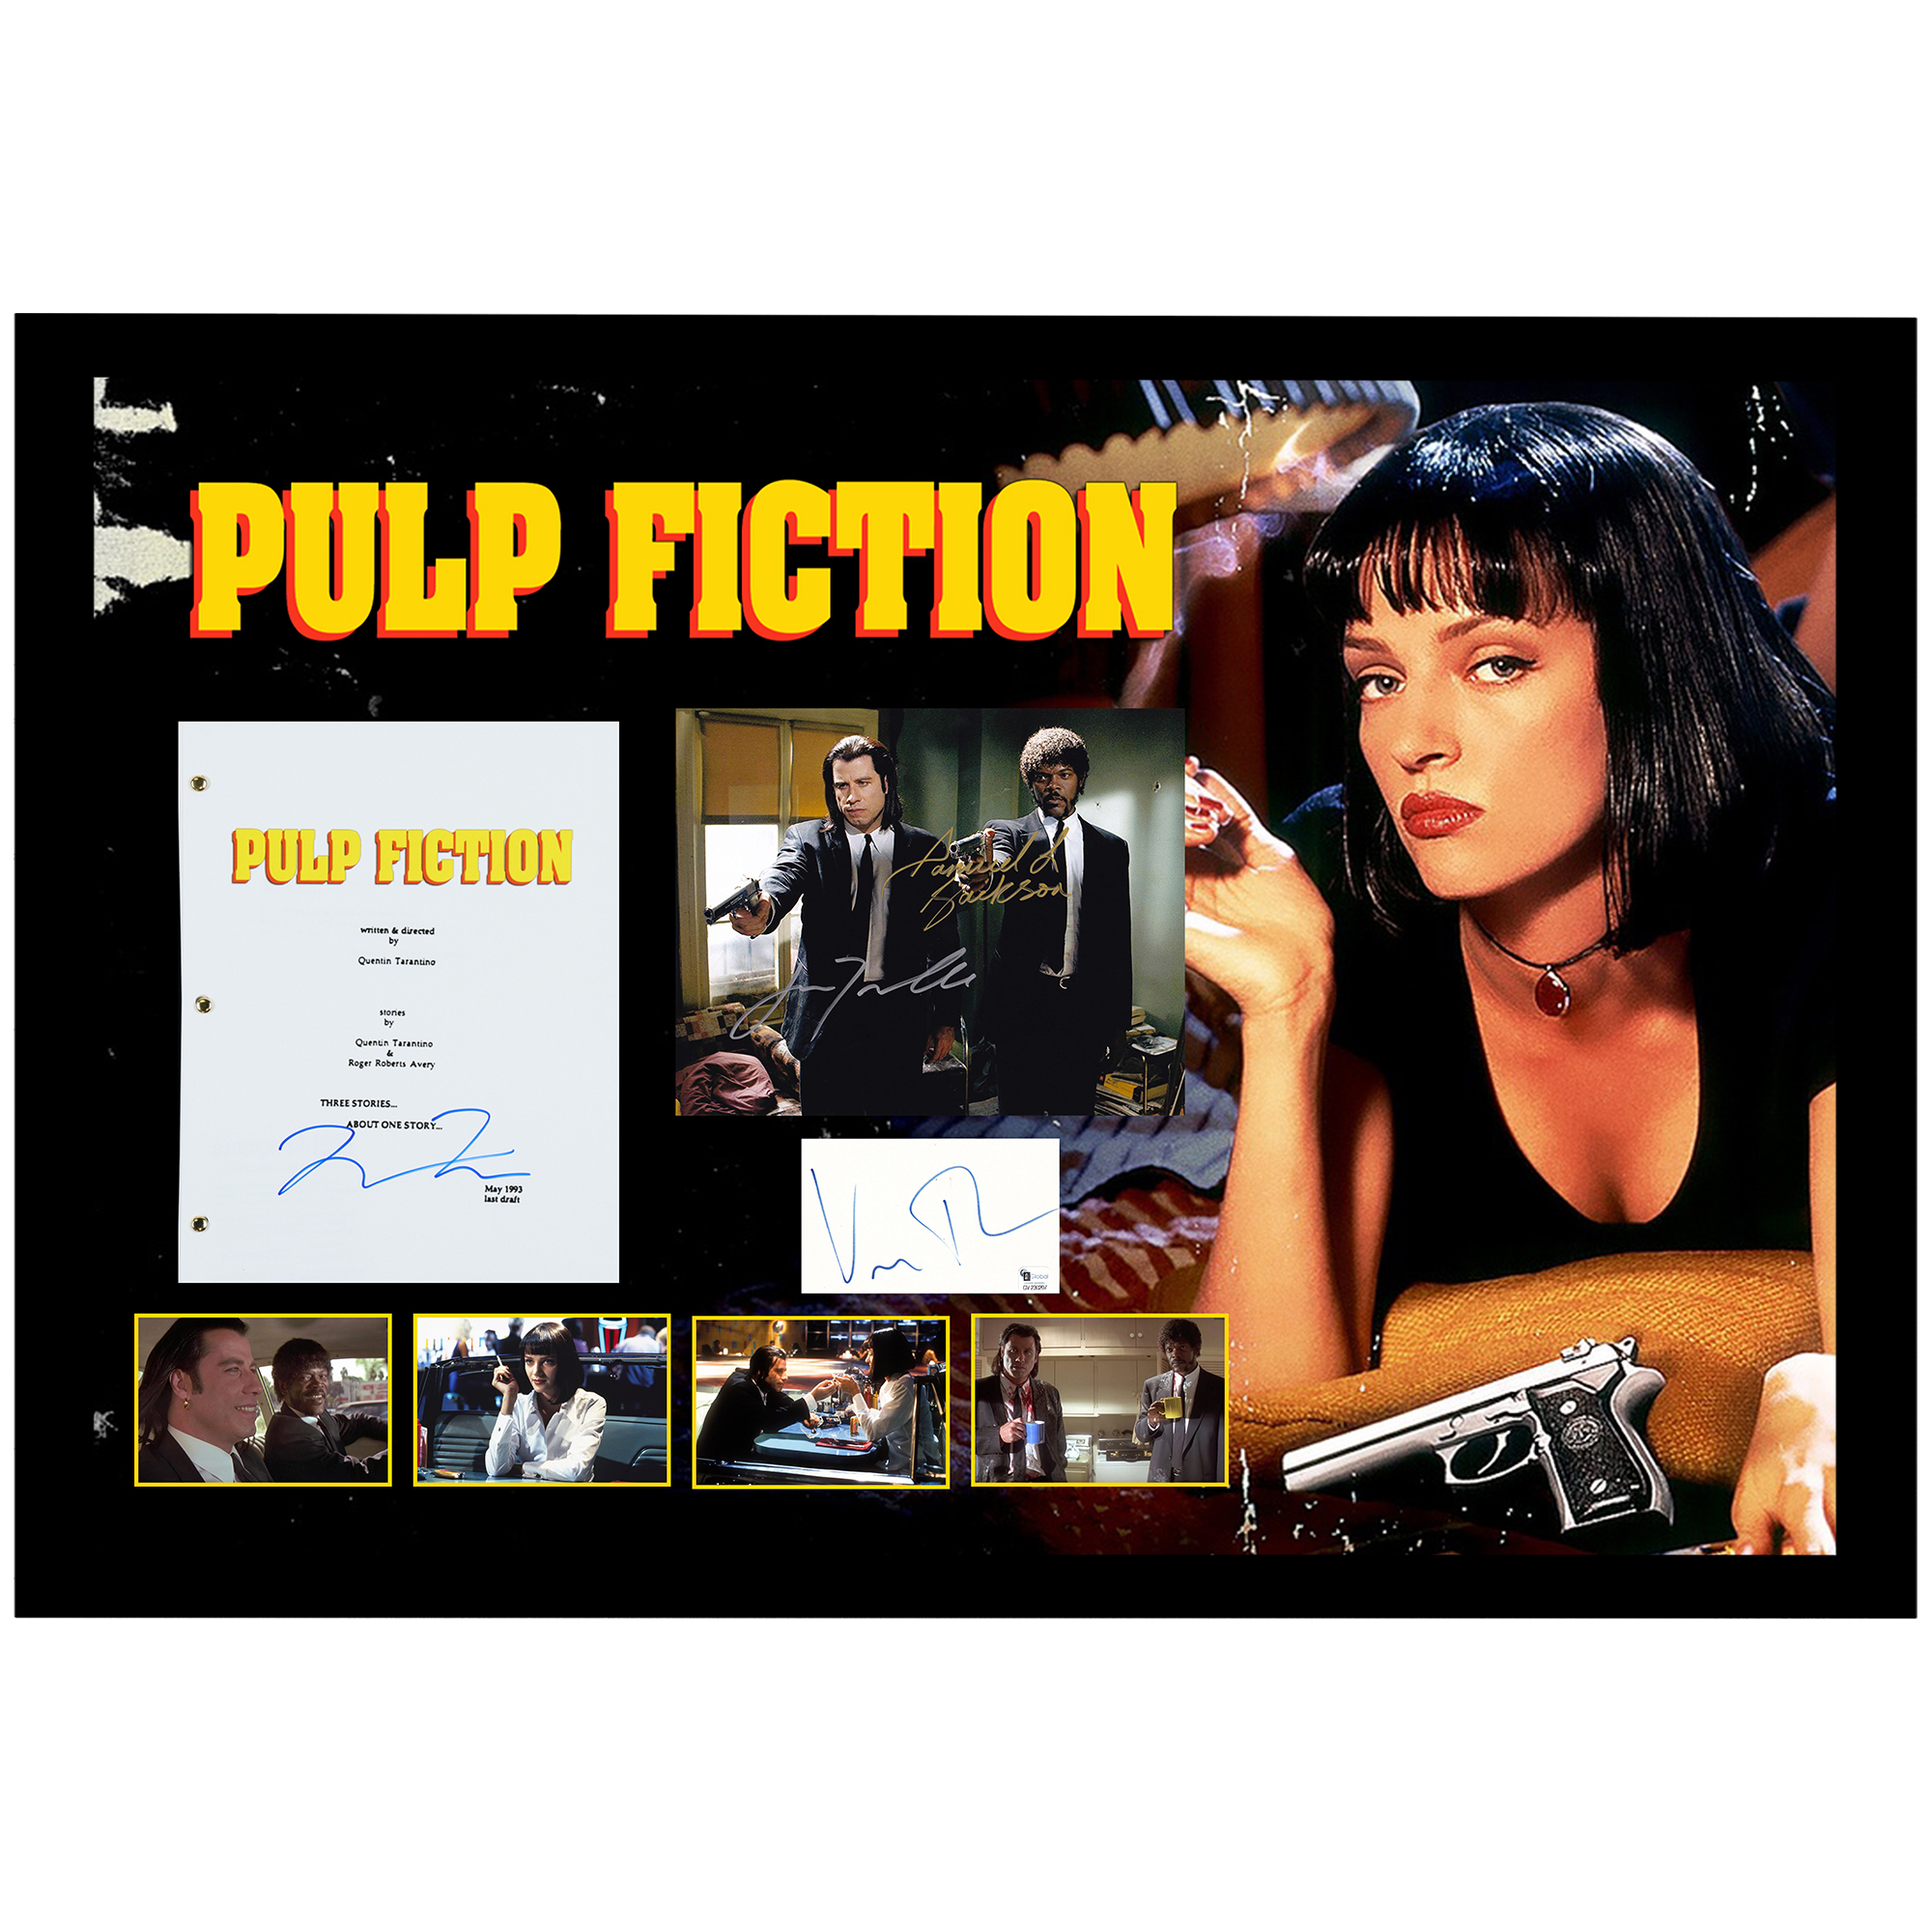 Pulp Fiction Signed Poster Available For Sale - Presley Collectibles